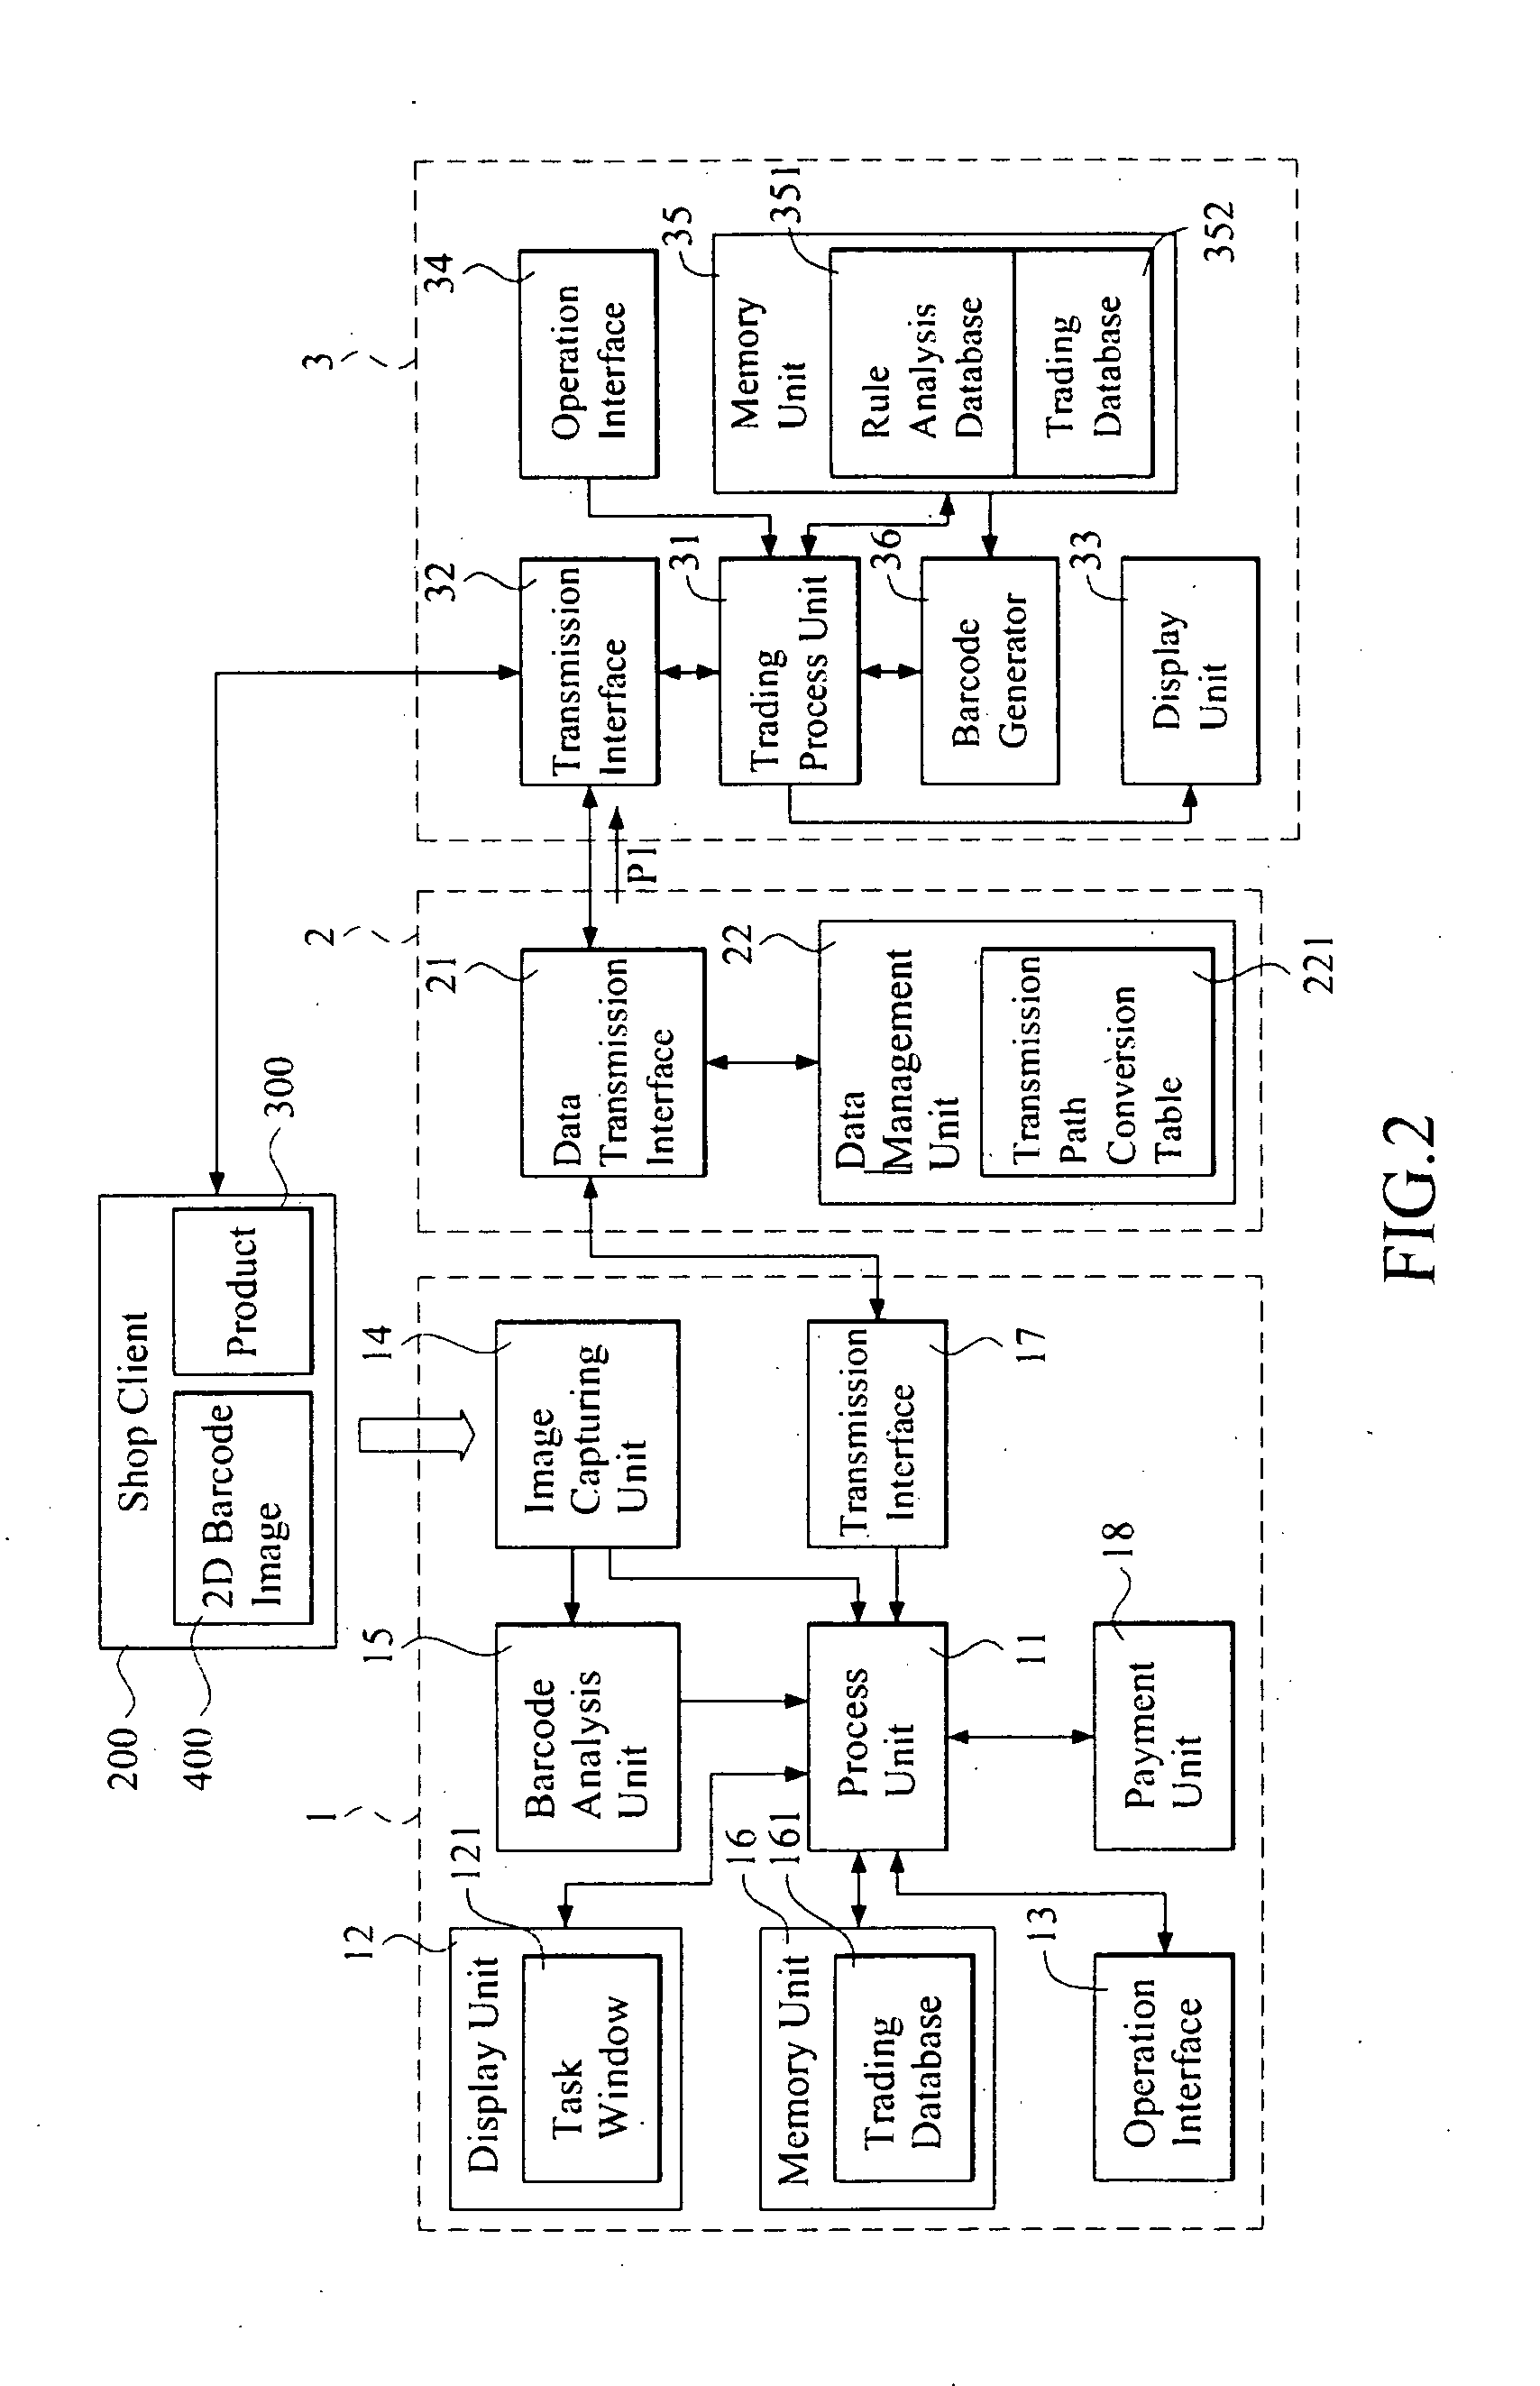 Mobile transaction system and method